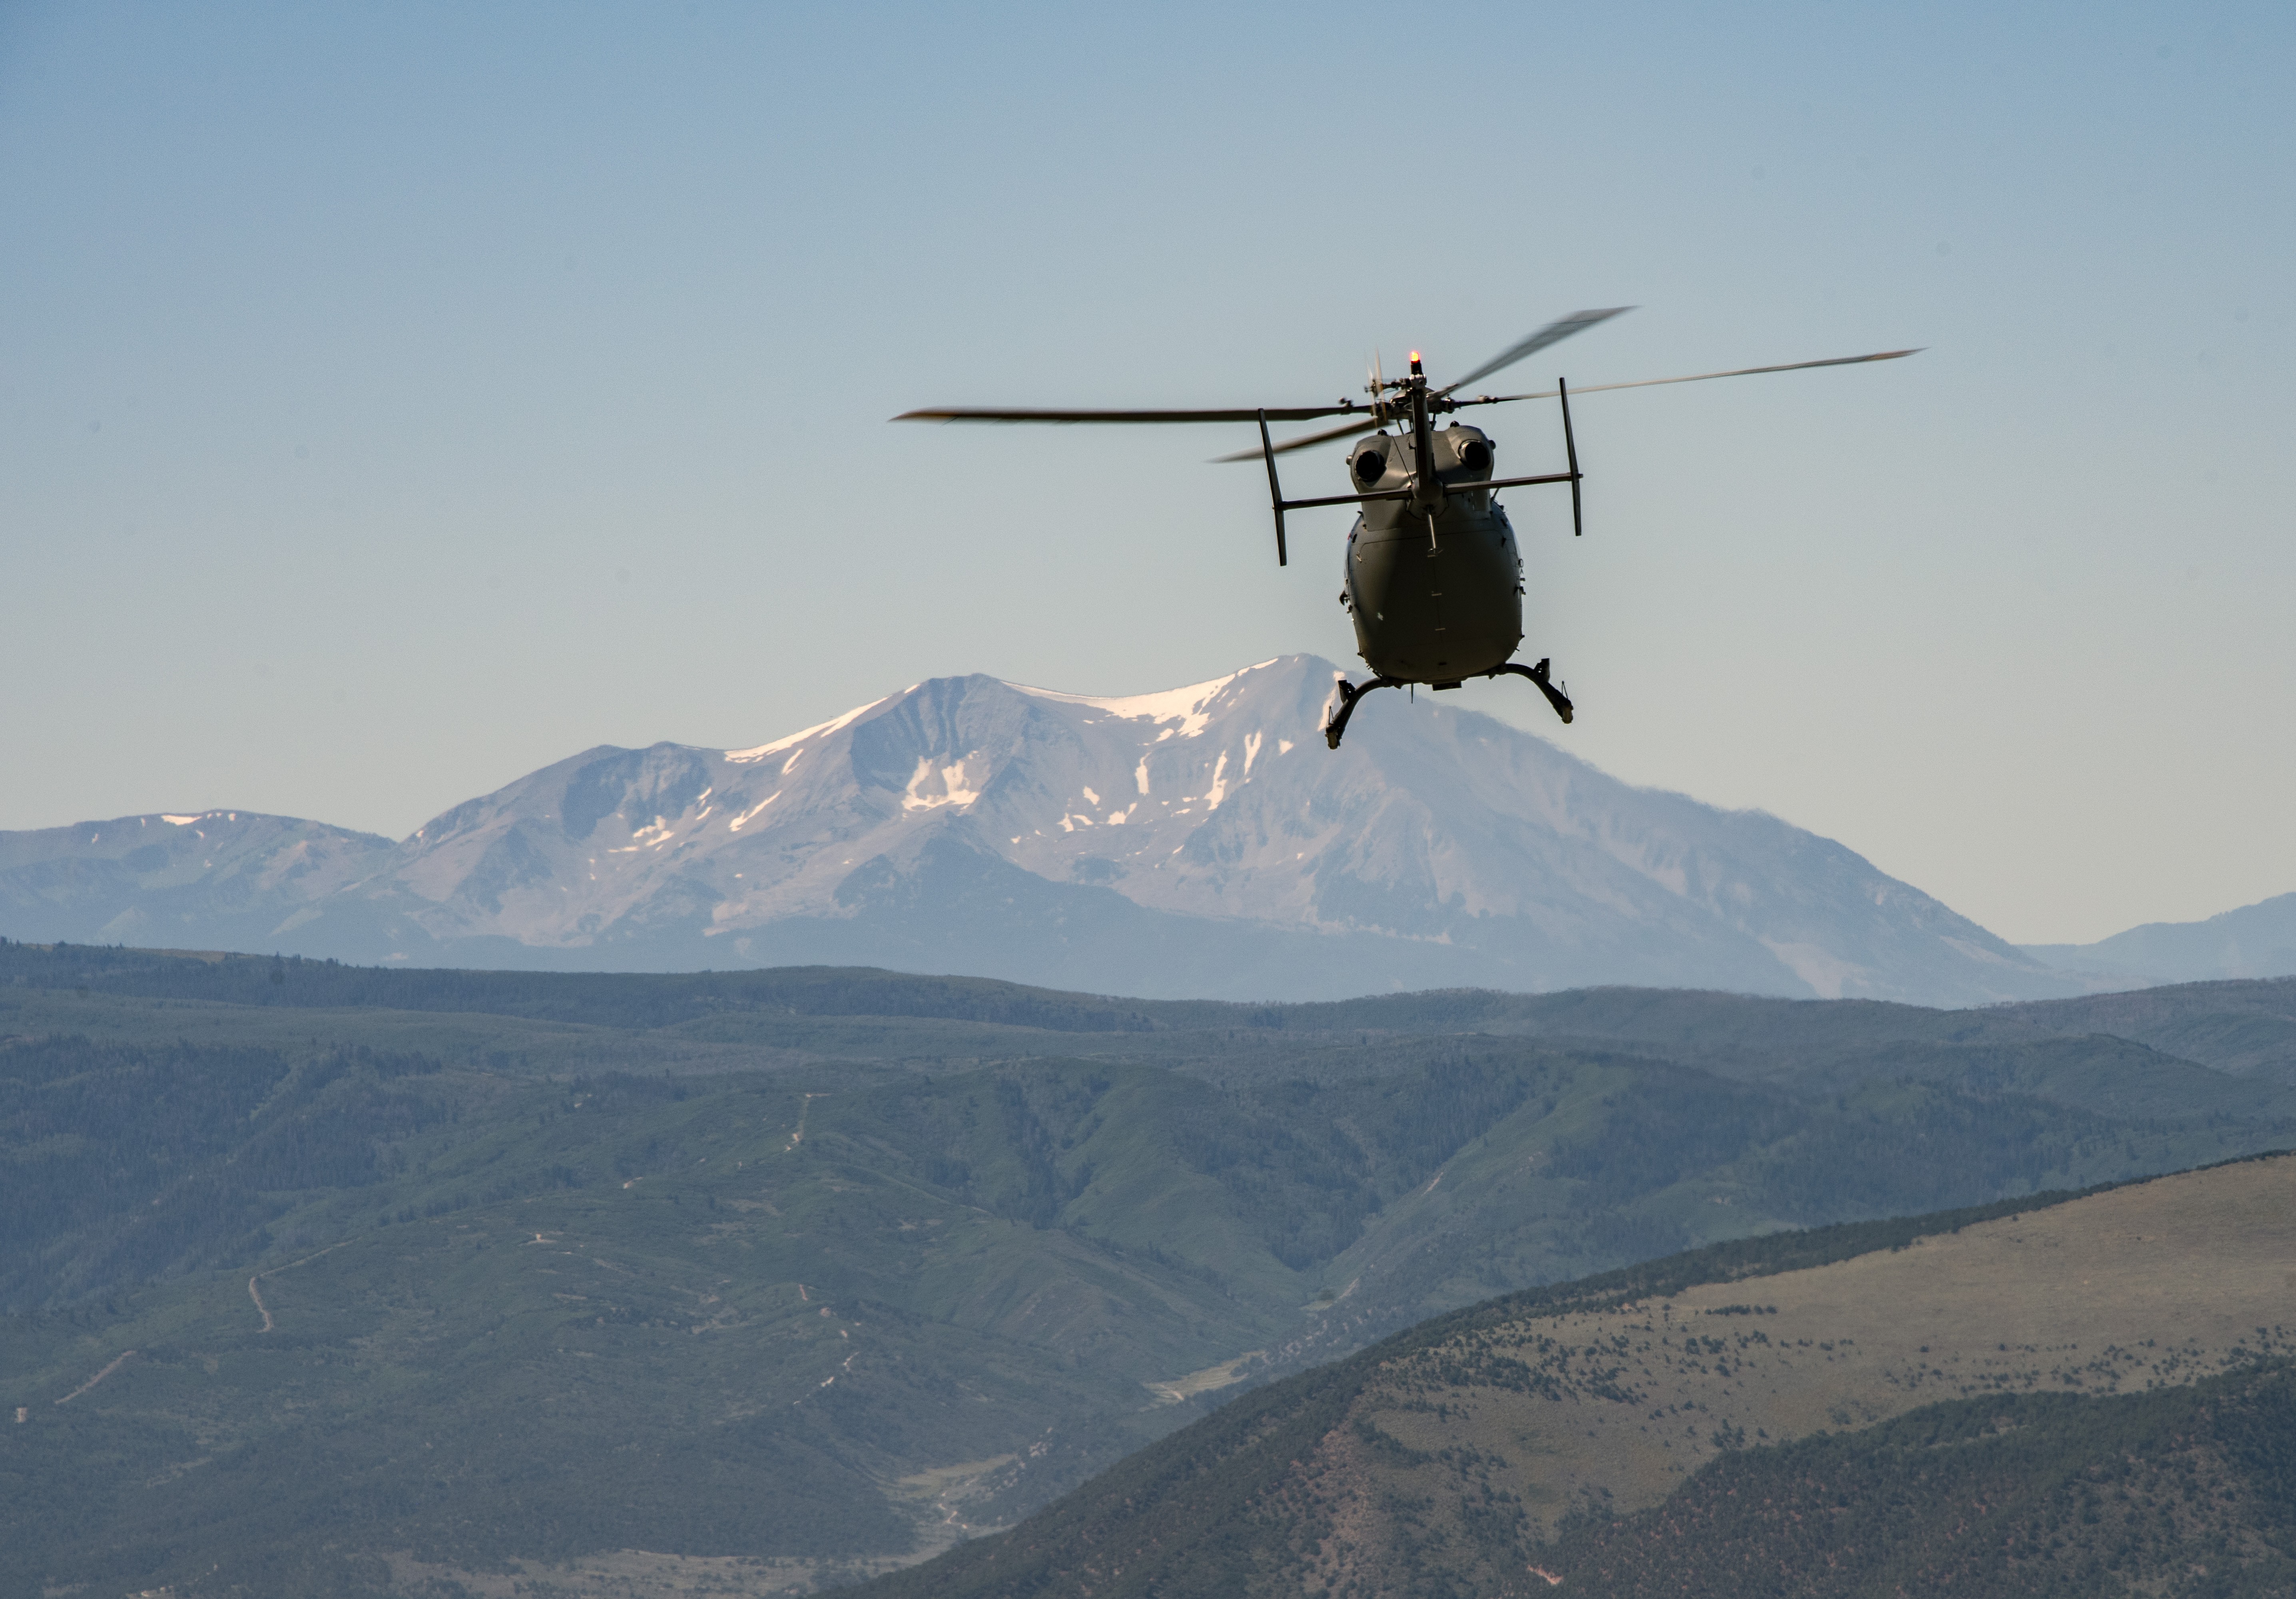 Army Helo School Tests Aircrews High On Jagged Mountains Article